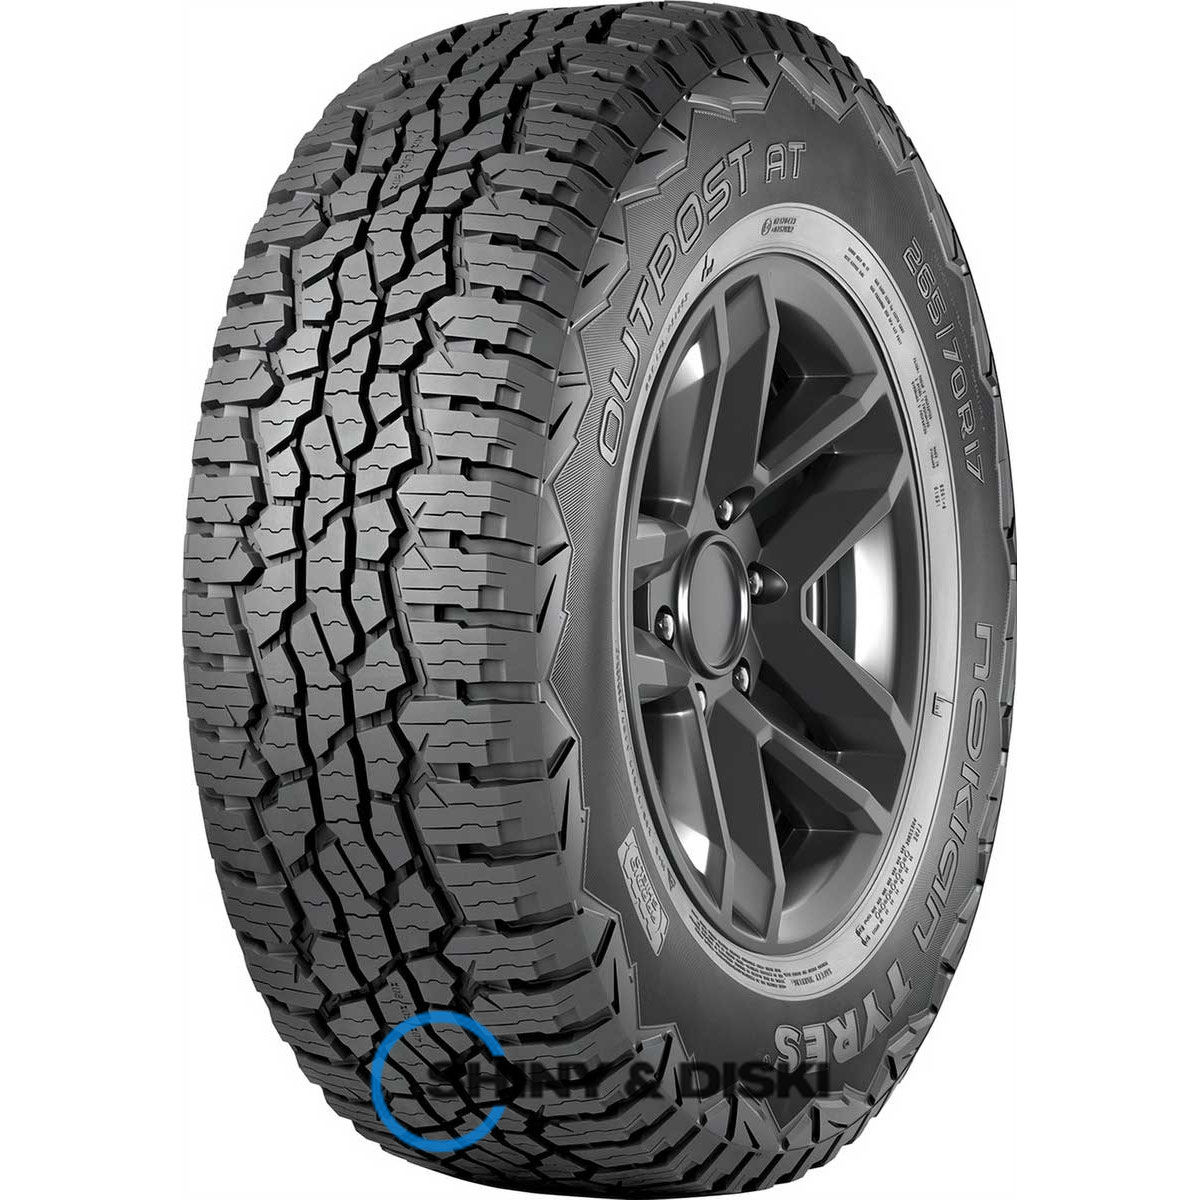 nokian outpost at 235/80 r17 120/117s